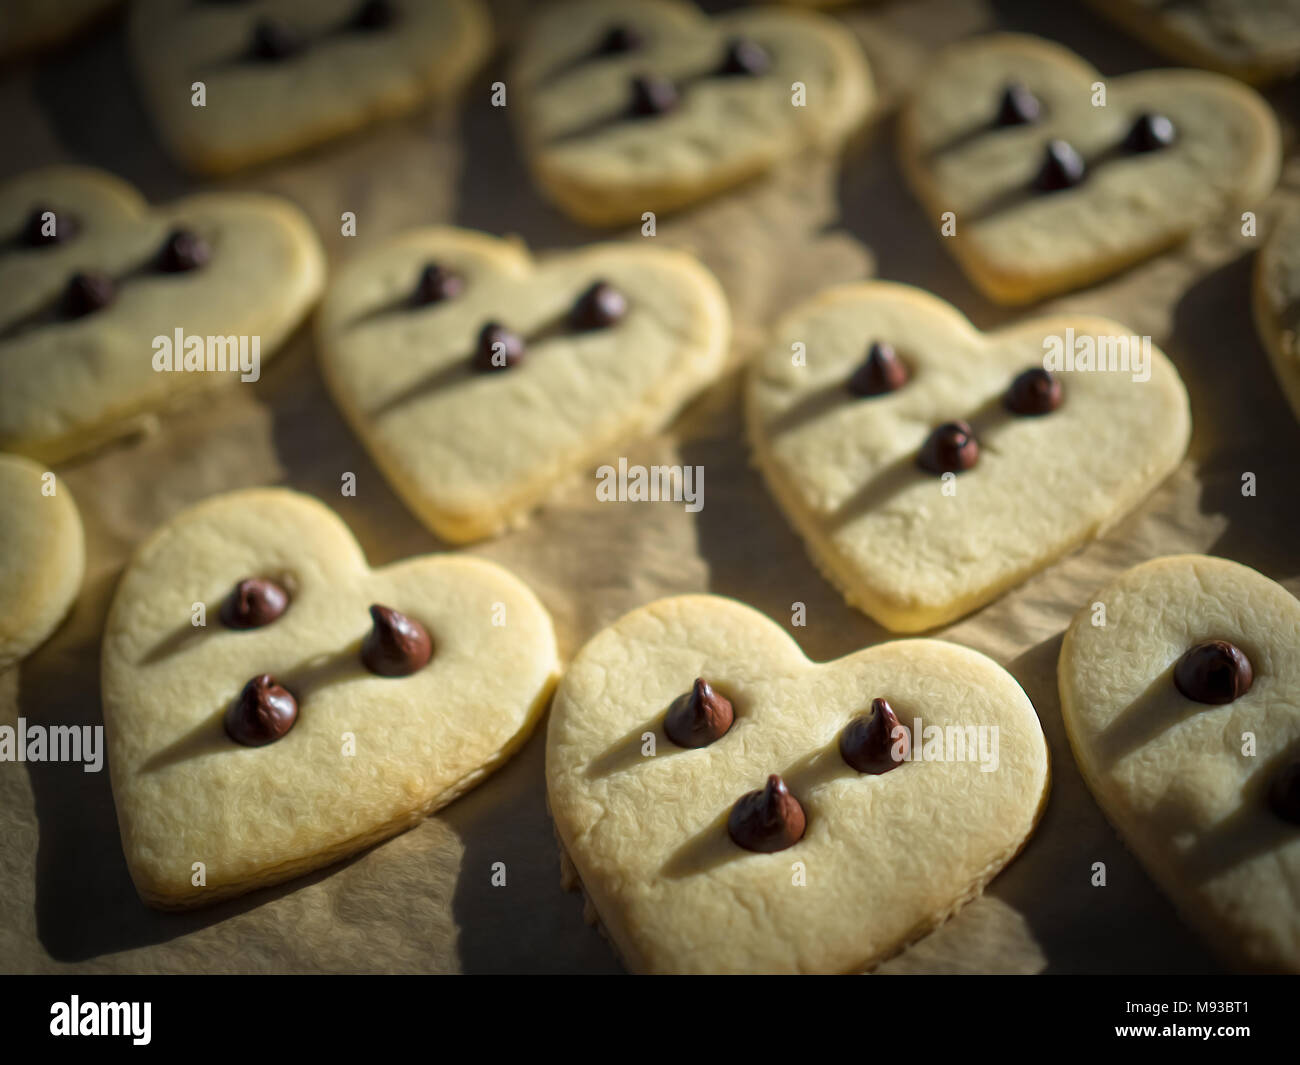 Just out of the oven heart shaped sugar cookies with chocolate chips arranged on a baking sheet. Stock Photo